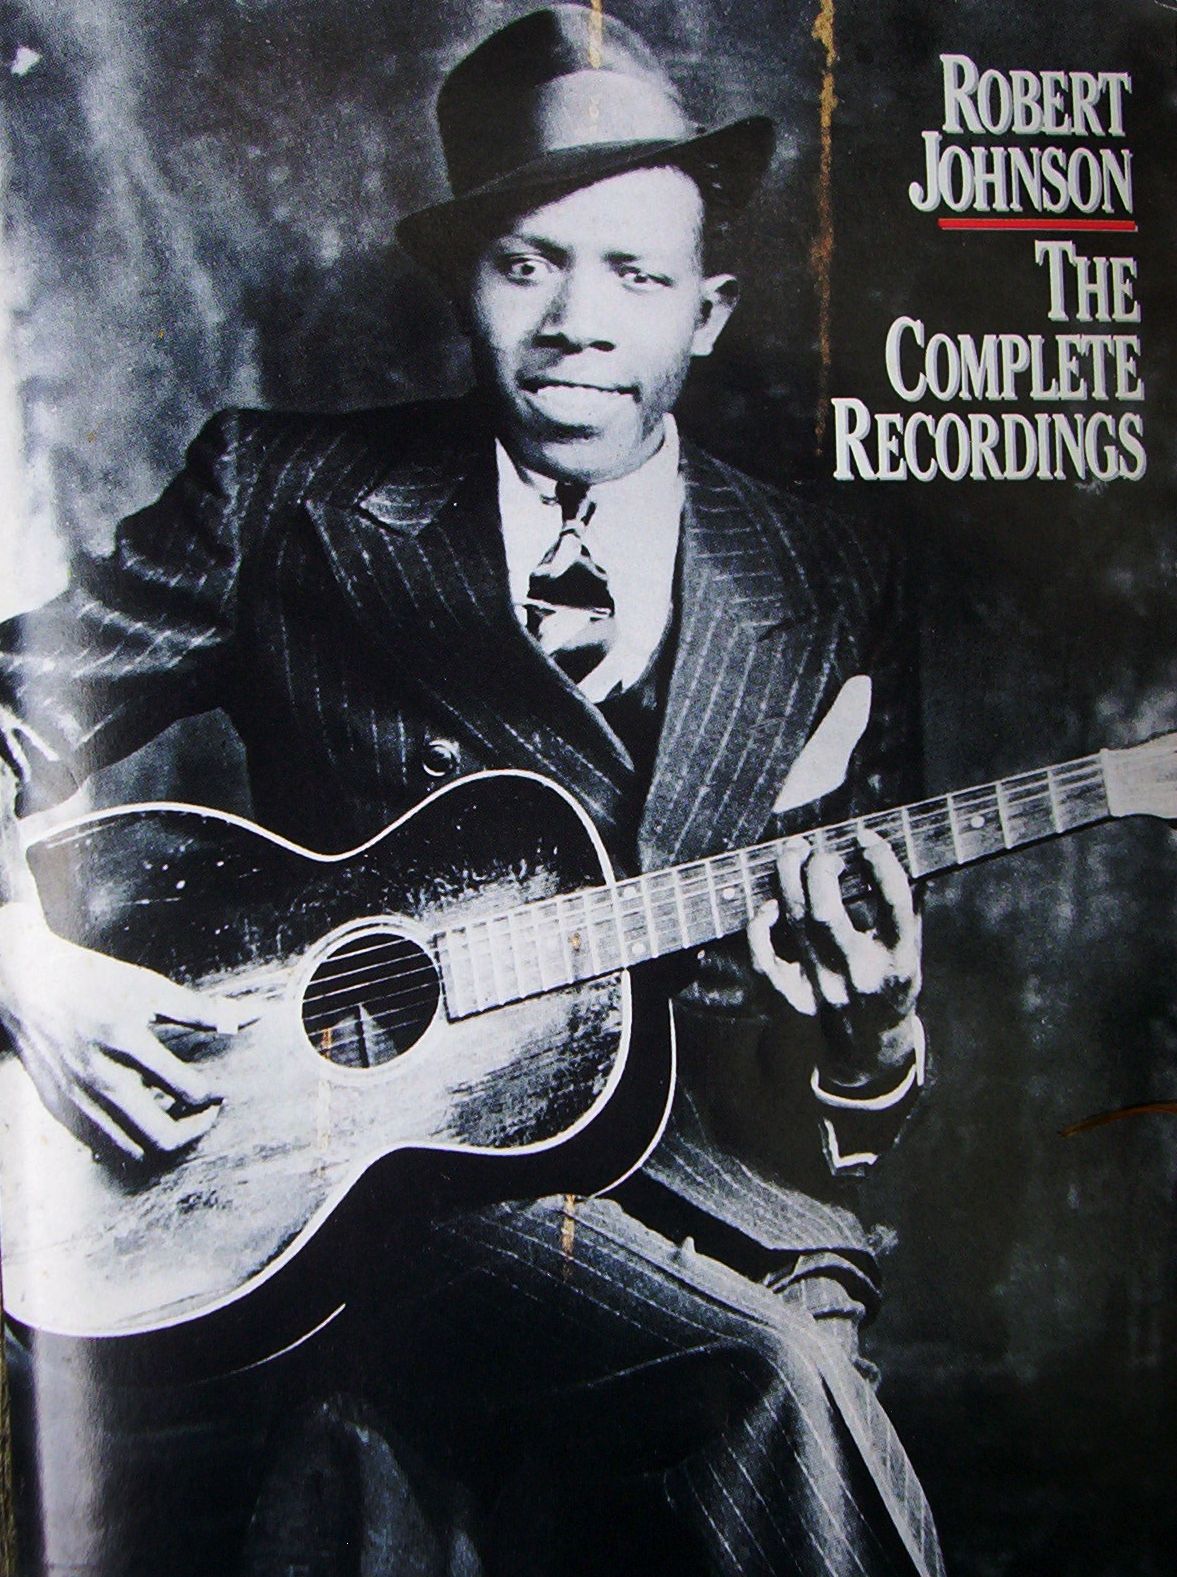 THE ROBERT JOHNSON STORY " MAN WITH THE BLUES " AN INDIE FILM